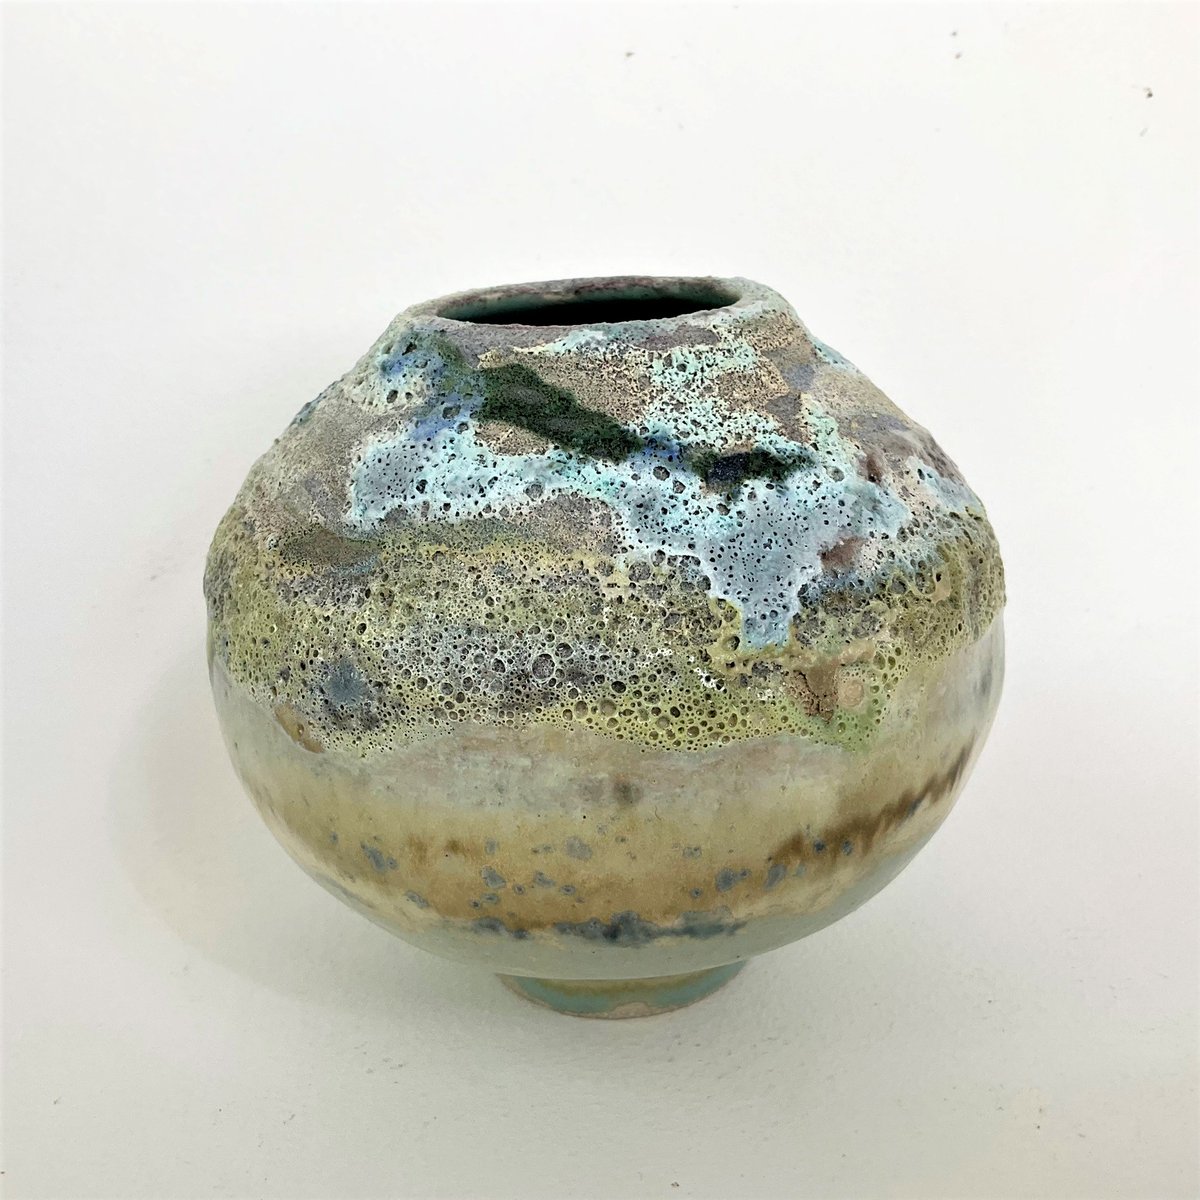 Coastal Orb by Marie Pearson. I can hear the tide coming in and see the salty foam on the rocks. #tonbridgehighstreet #summer #ceramicart #seaart #inspiredbynature #water #contemporaryceramics #seascape #beach #tides